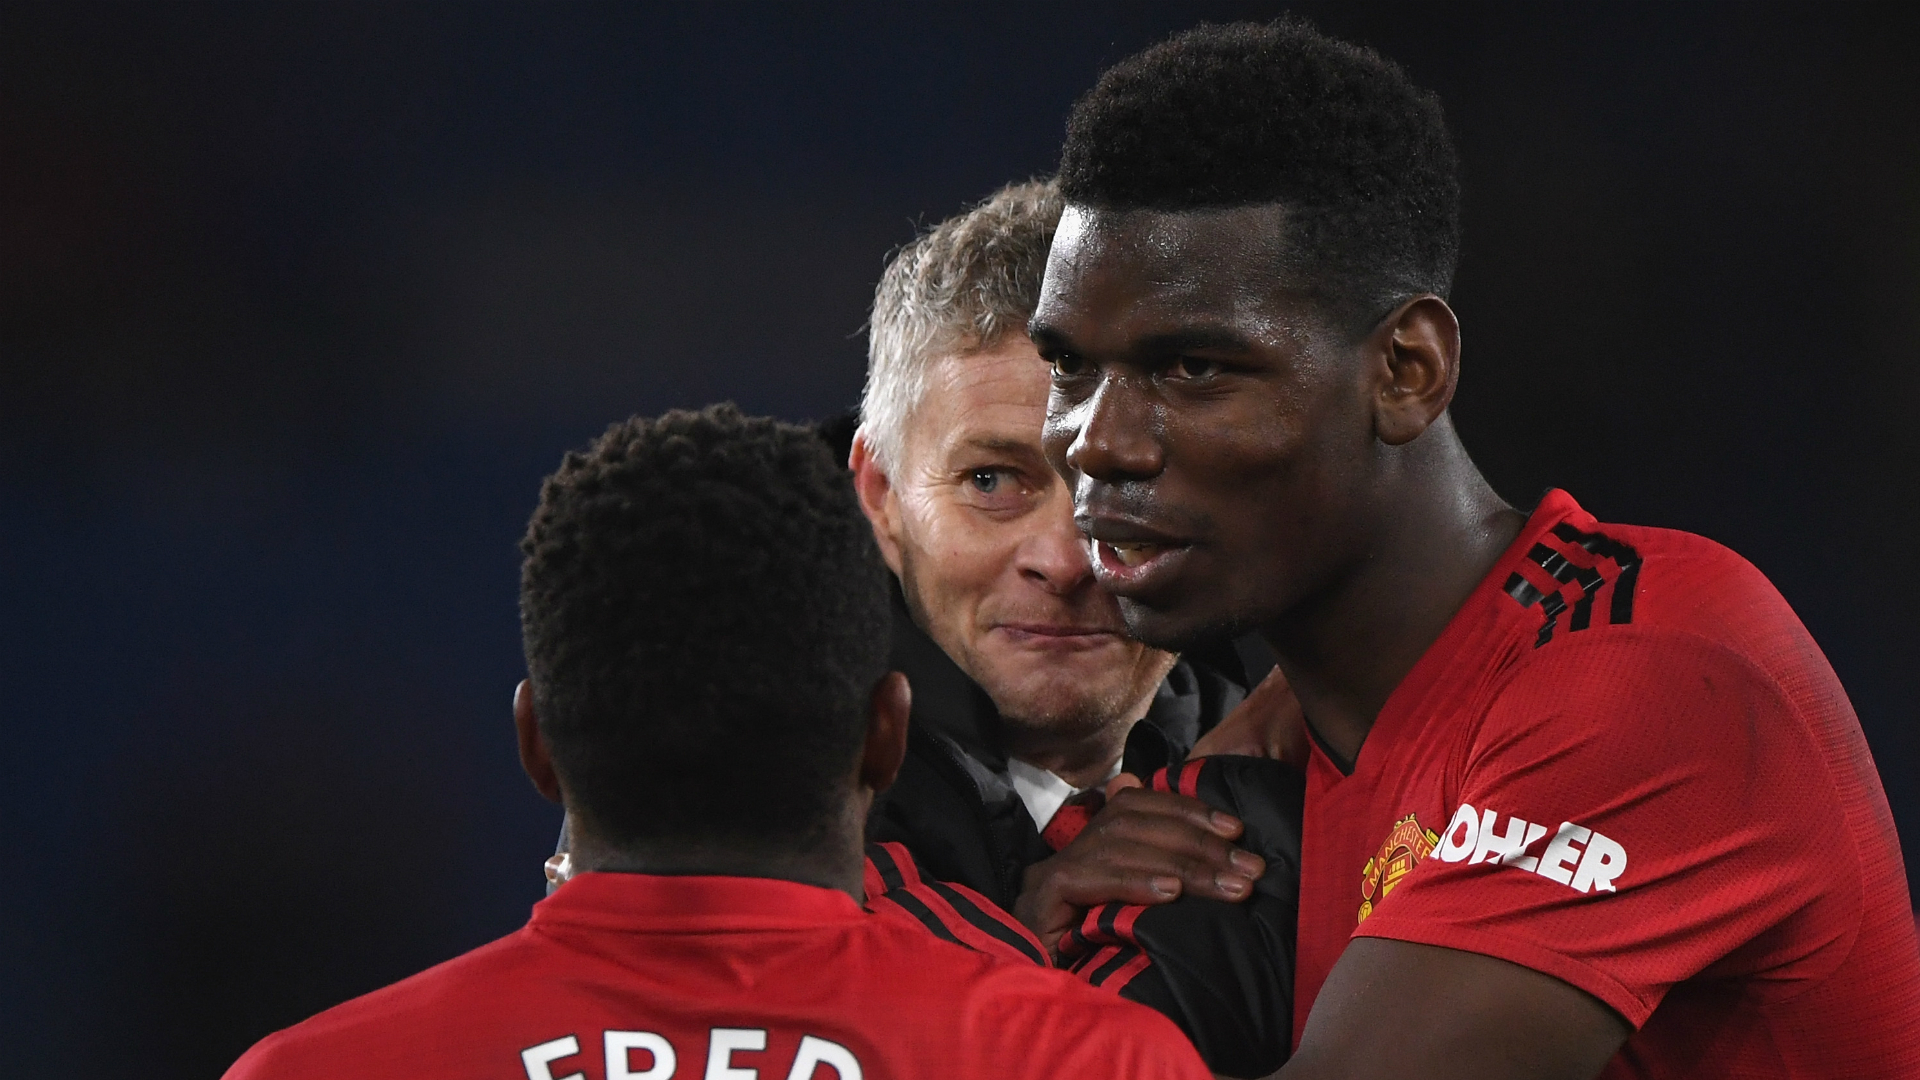 Having fallen out with Jose Mourinho, Paul Pogba has revelled in the positivity brought to Manchester United by Ole Gunnar Solskjaer.